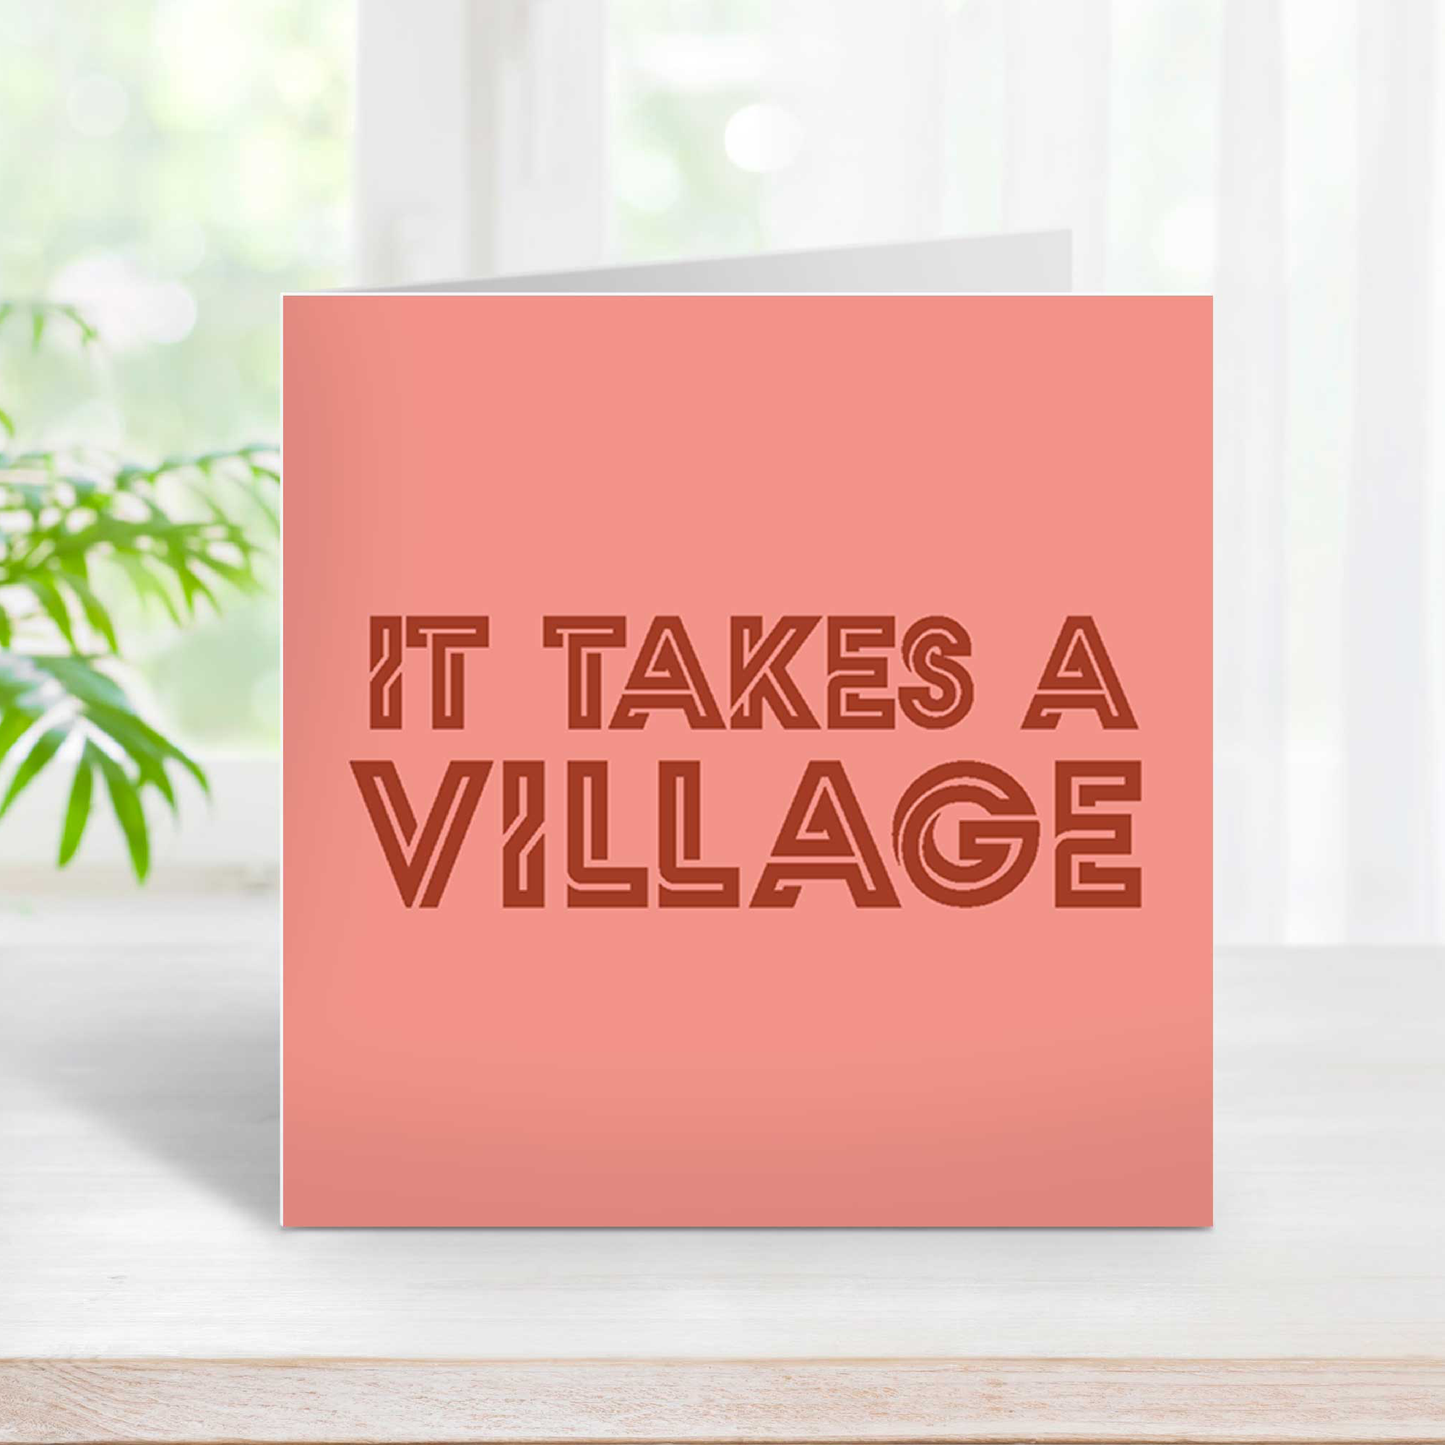 IT TAKES A VILLAGE GREETINGS CARD